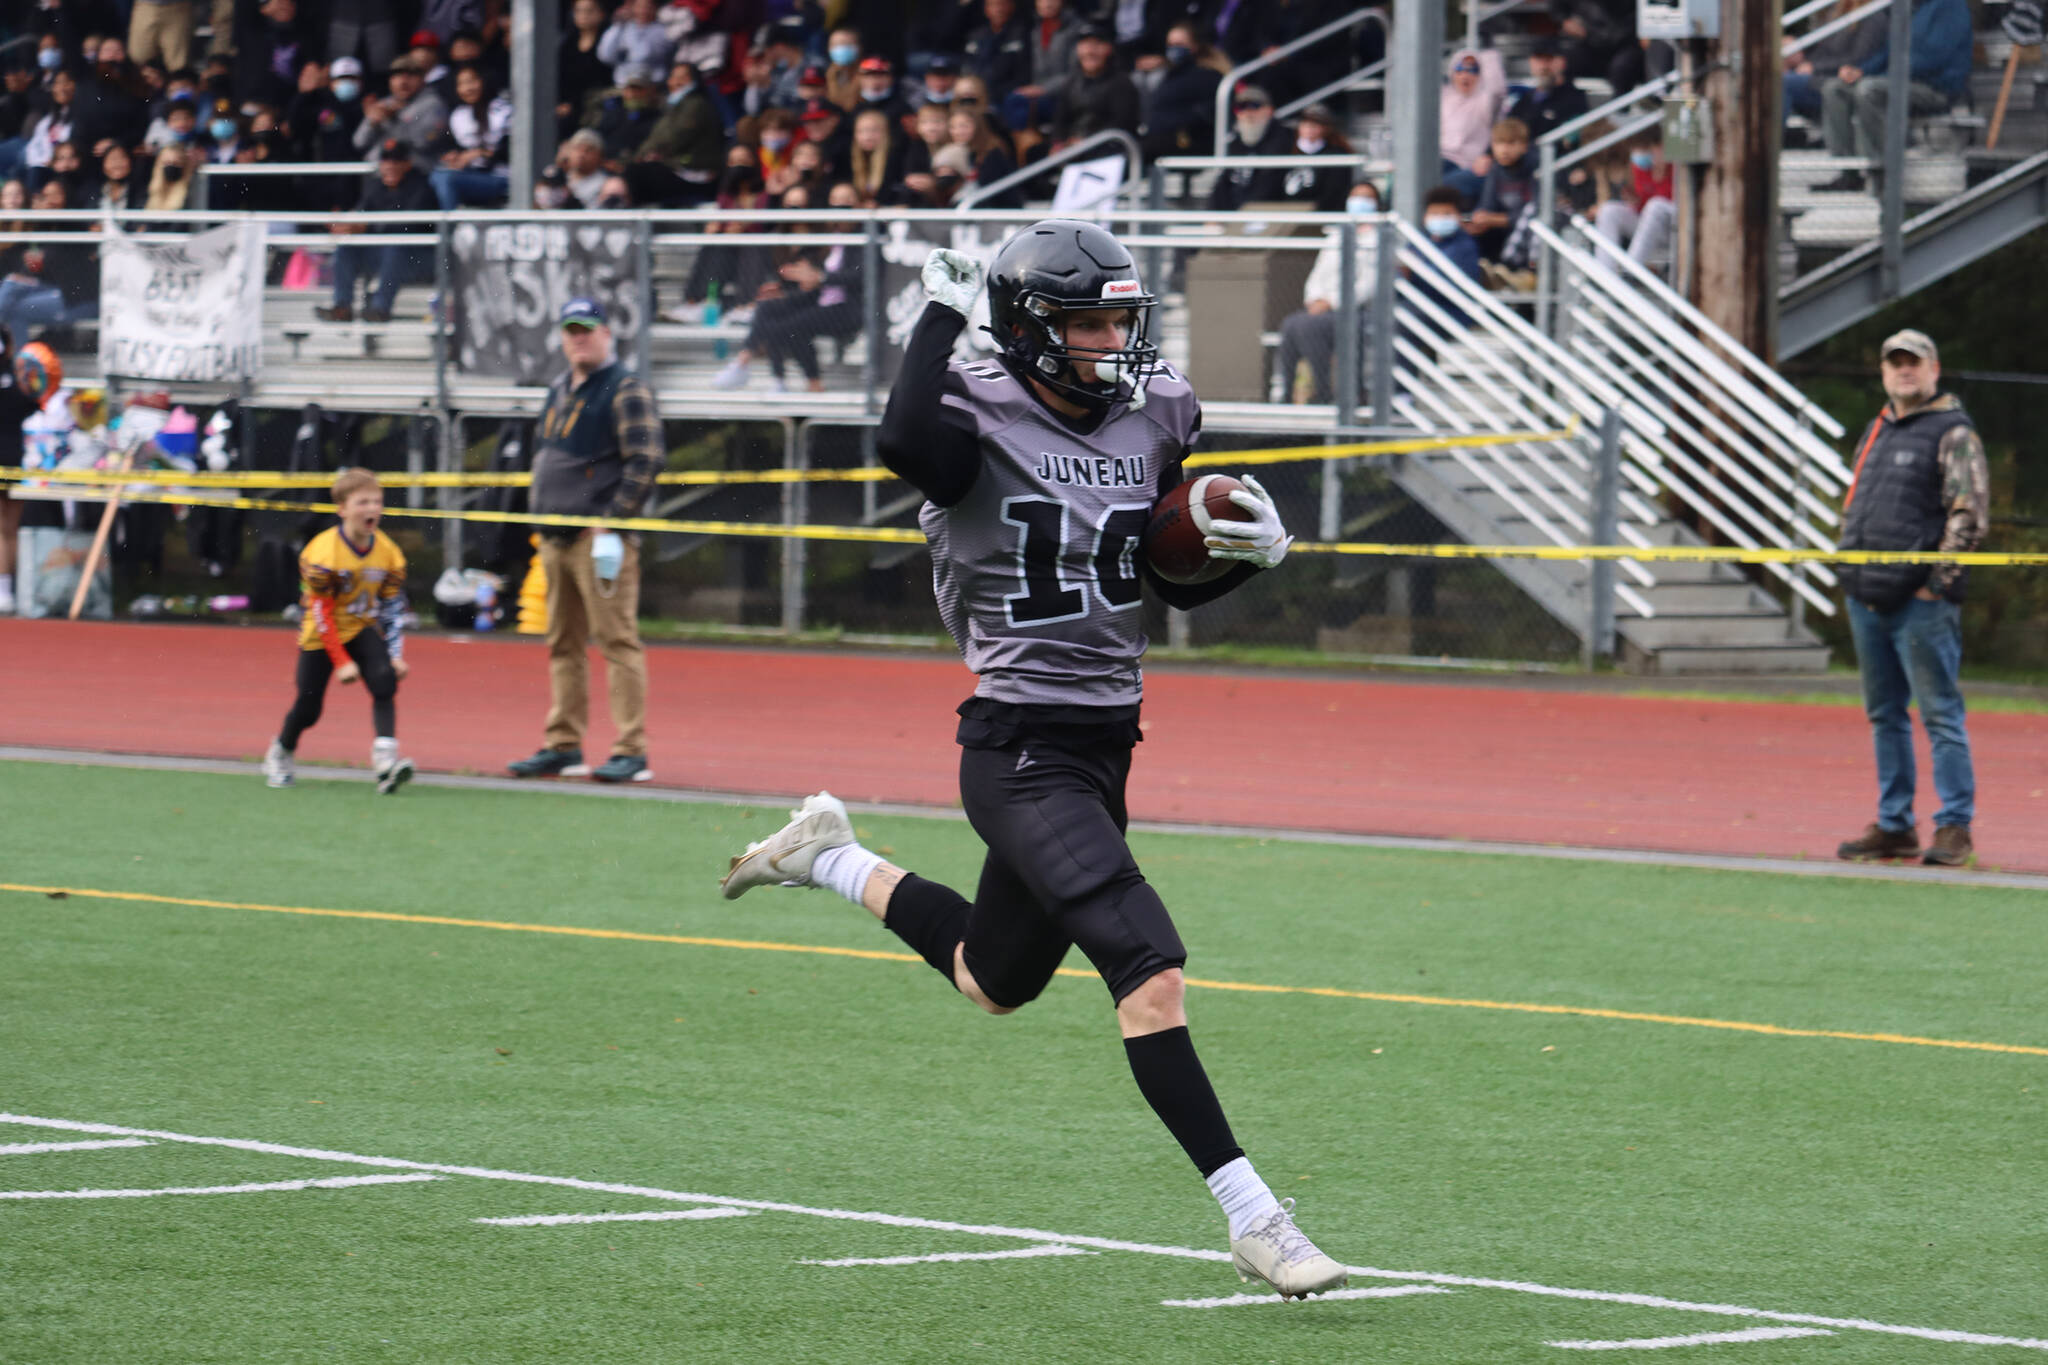 James Connally, a senior, makes his way toward the end zone to open the scoring for the Juneau Huskies. Connally also caught a pair of touchdowns in a 42-7 win against South Anchorage High School. (Ben Hohenstatt / Juneau Empire)